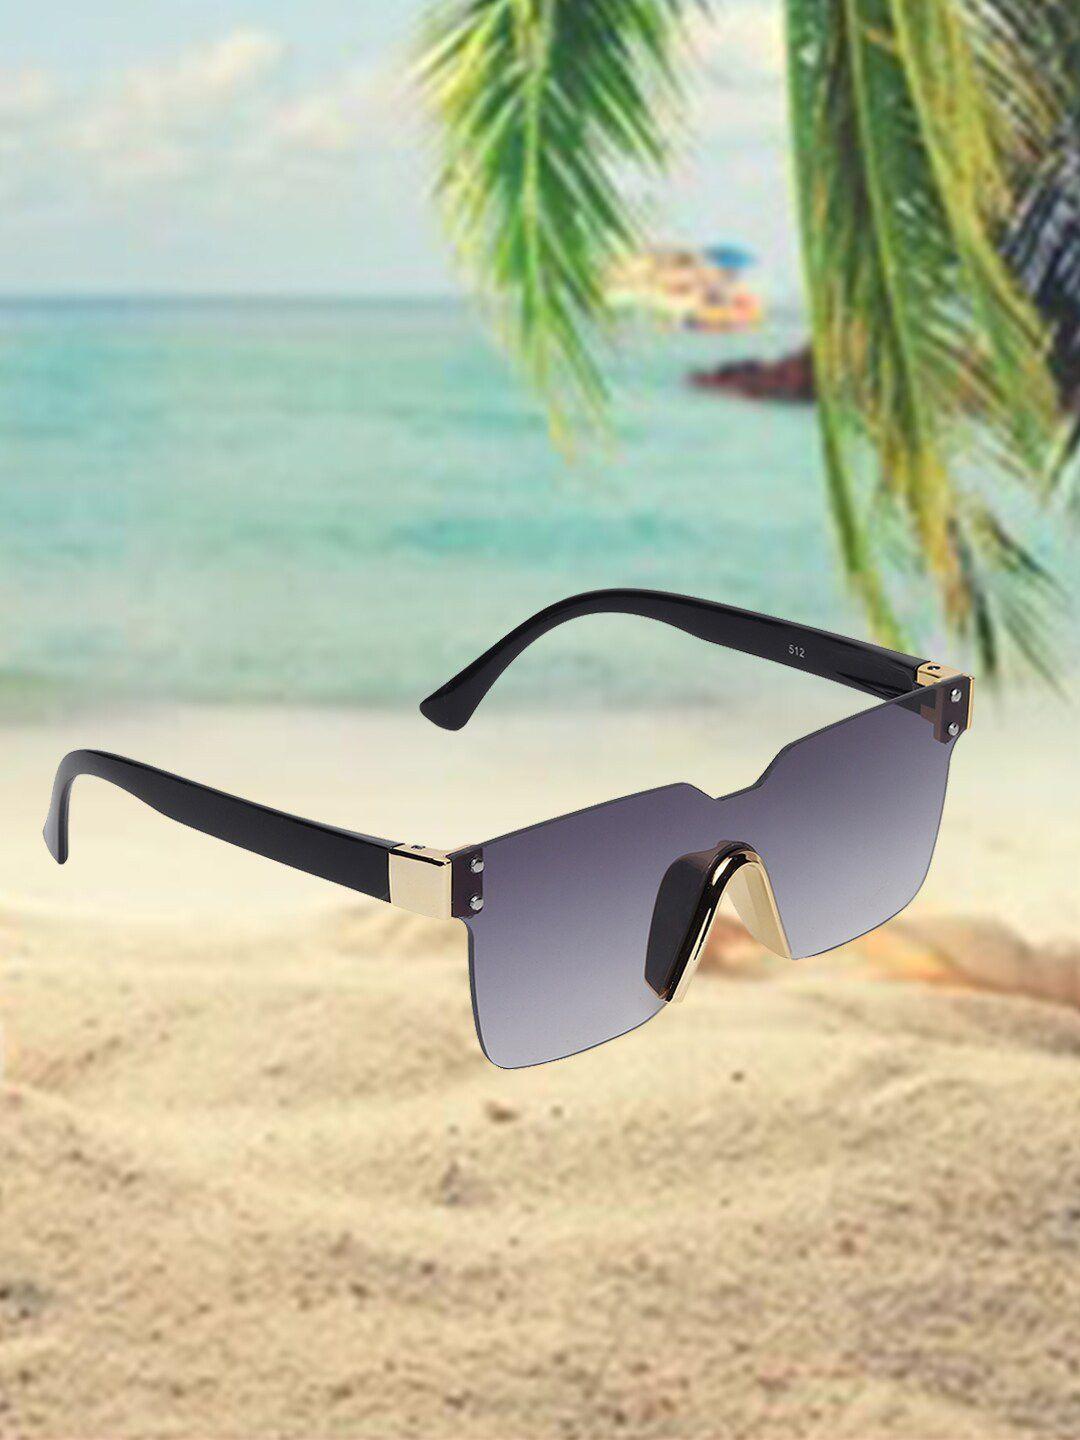 celebrity sunglasses rimless square sunglasses with uv protected lens- clsg-512-01